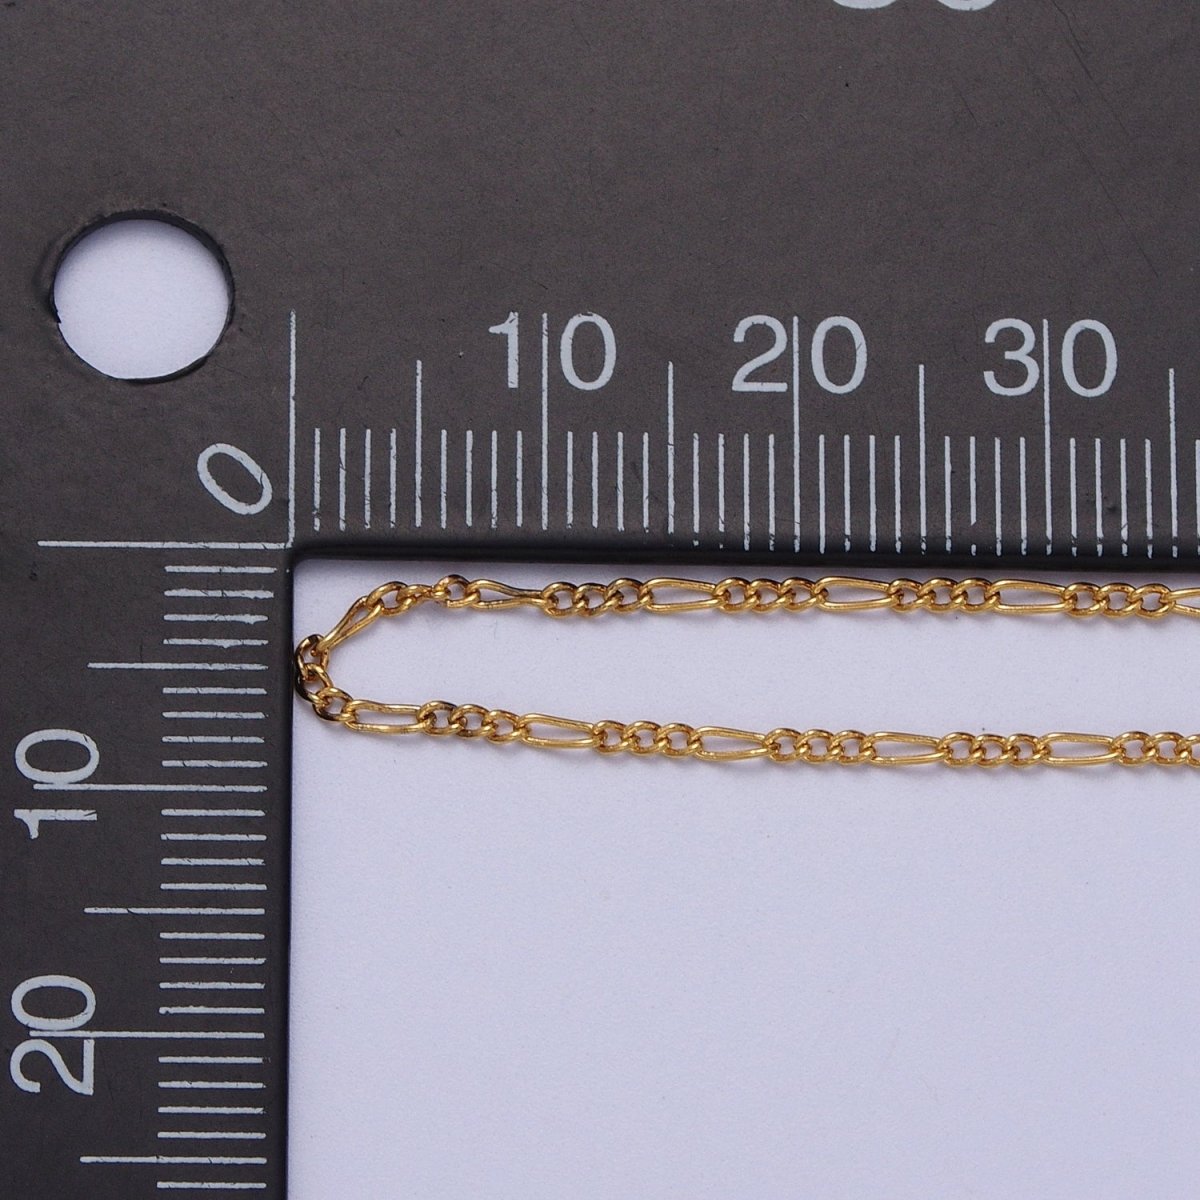 24K Gold Filled 1.3mm Dainty Figaro Unfinished Chain in Gold & Silver | ROLL-903, ROLL-904 Clearance Pricing - DLUXCA